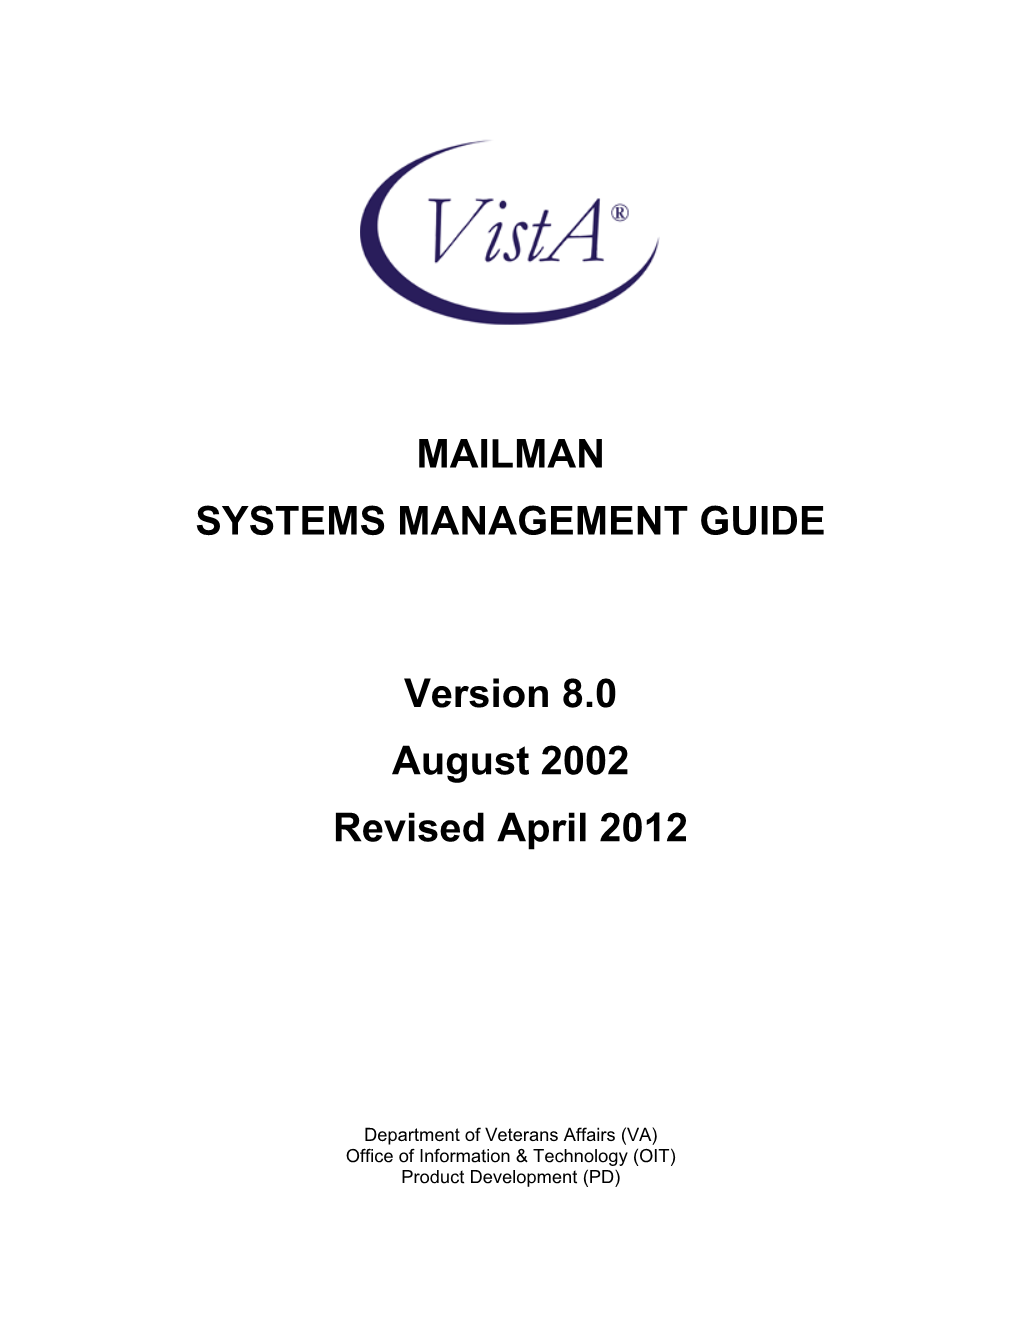 Mailman Systems Management Guide